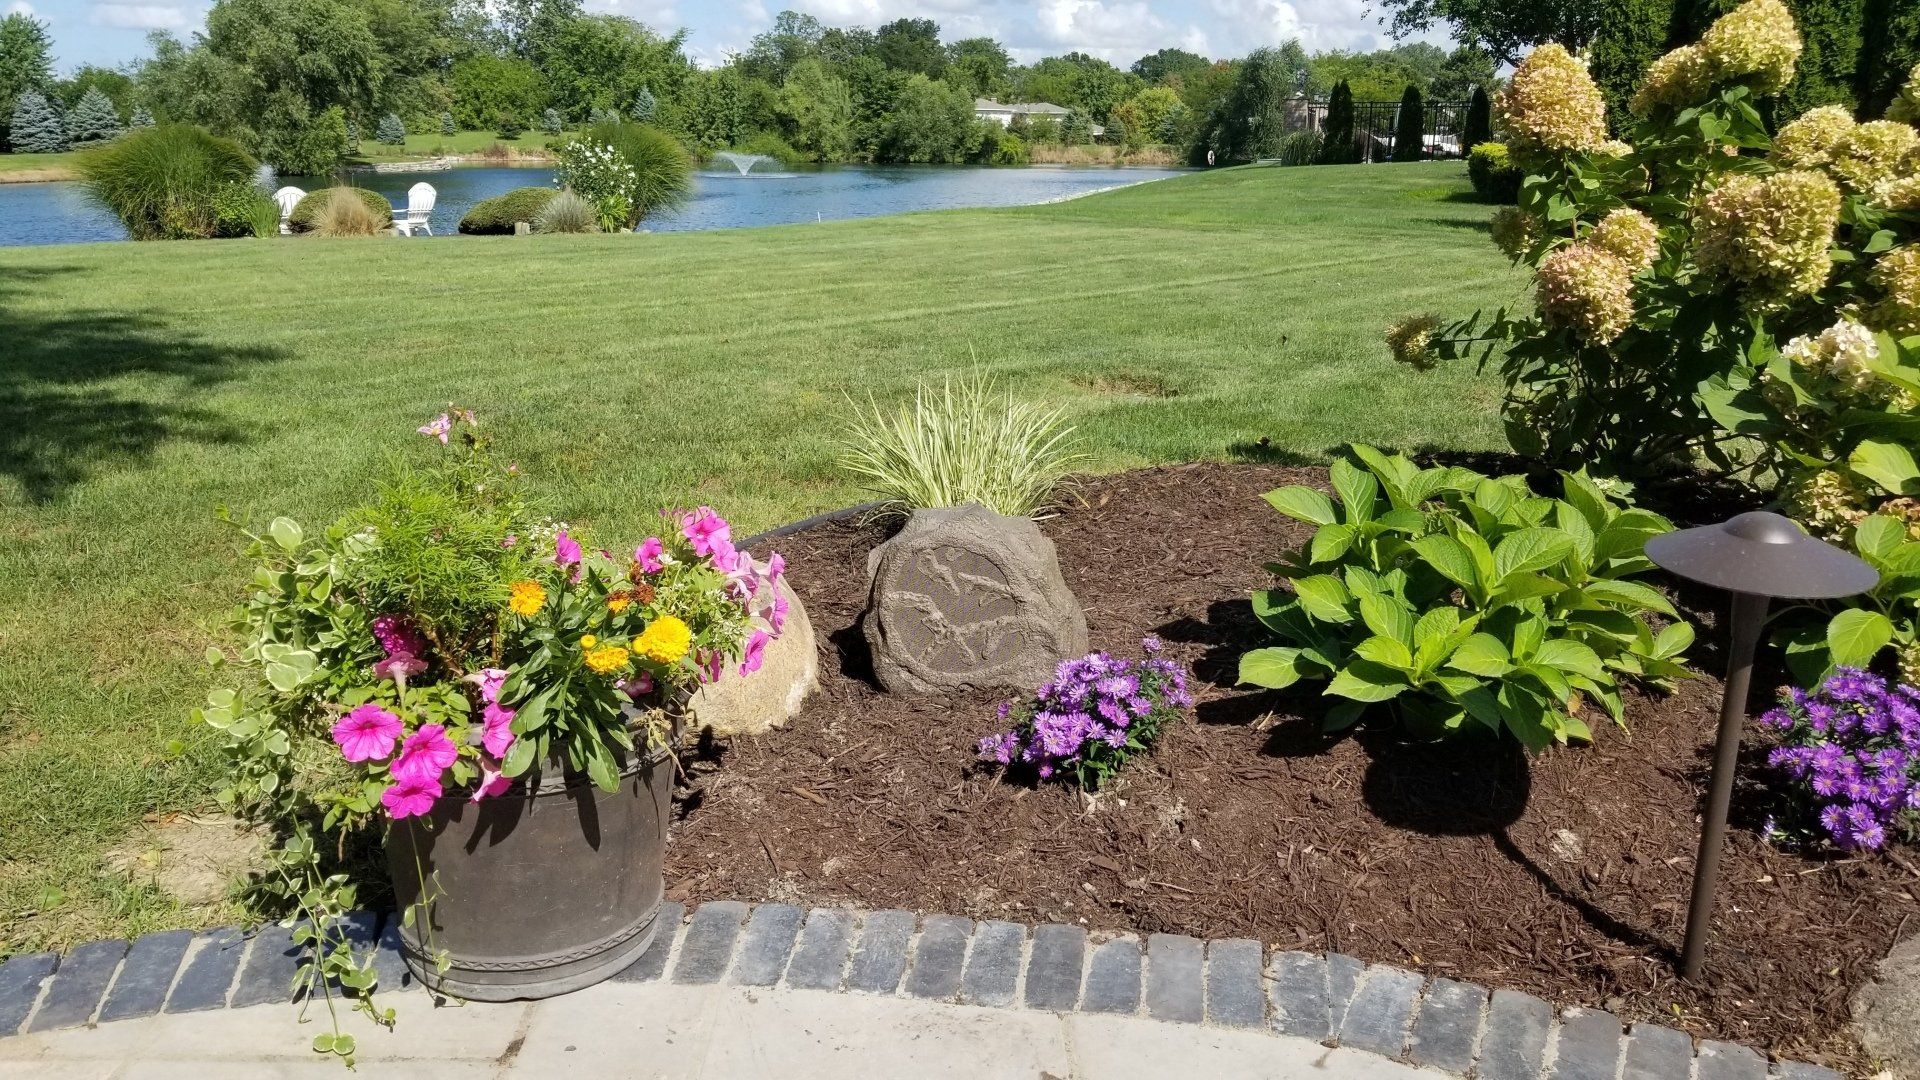 A garden with flowers, rock speakers, and a lake in the background